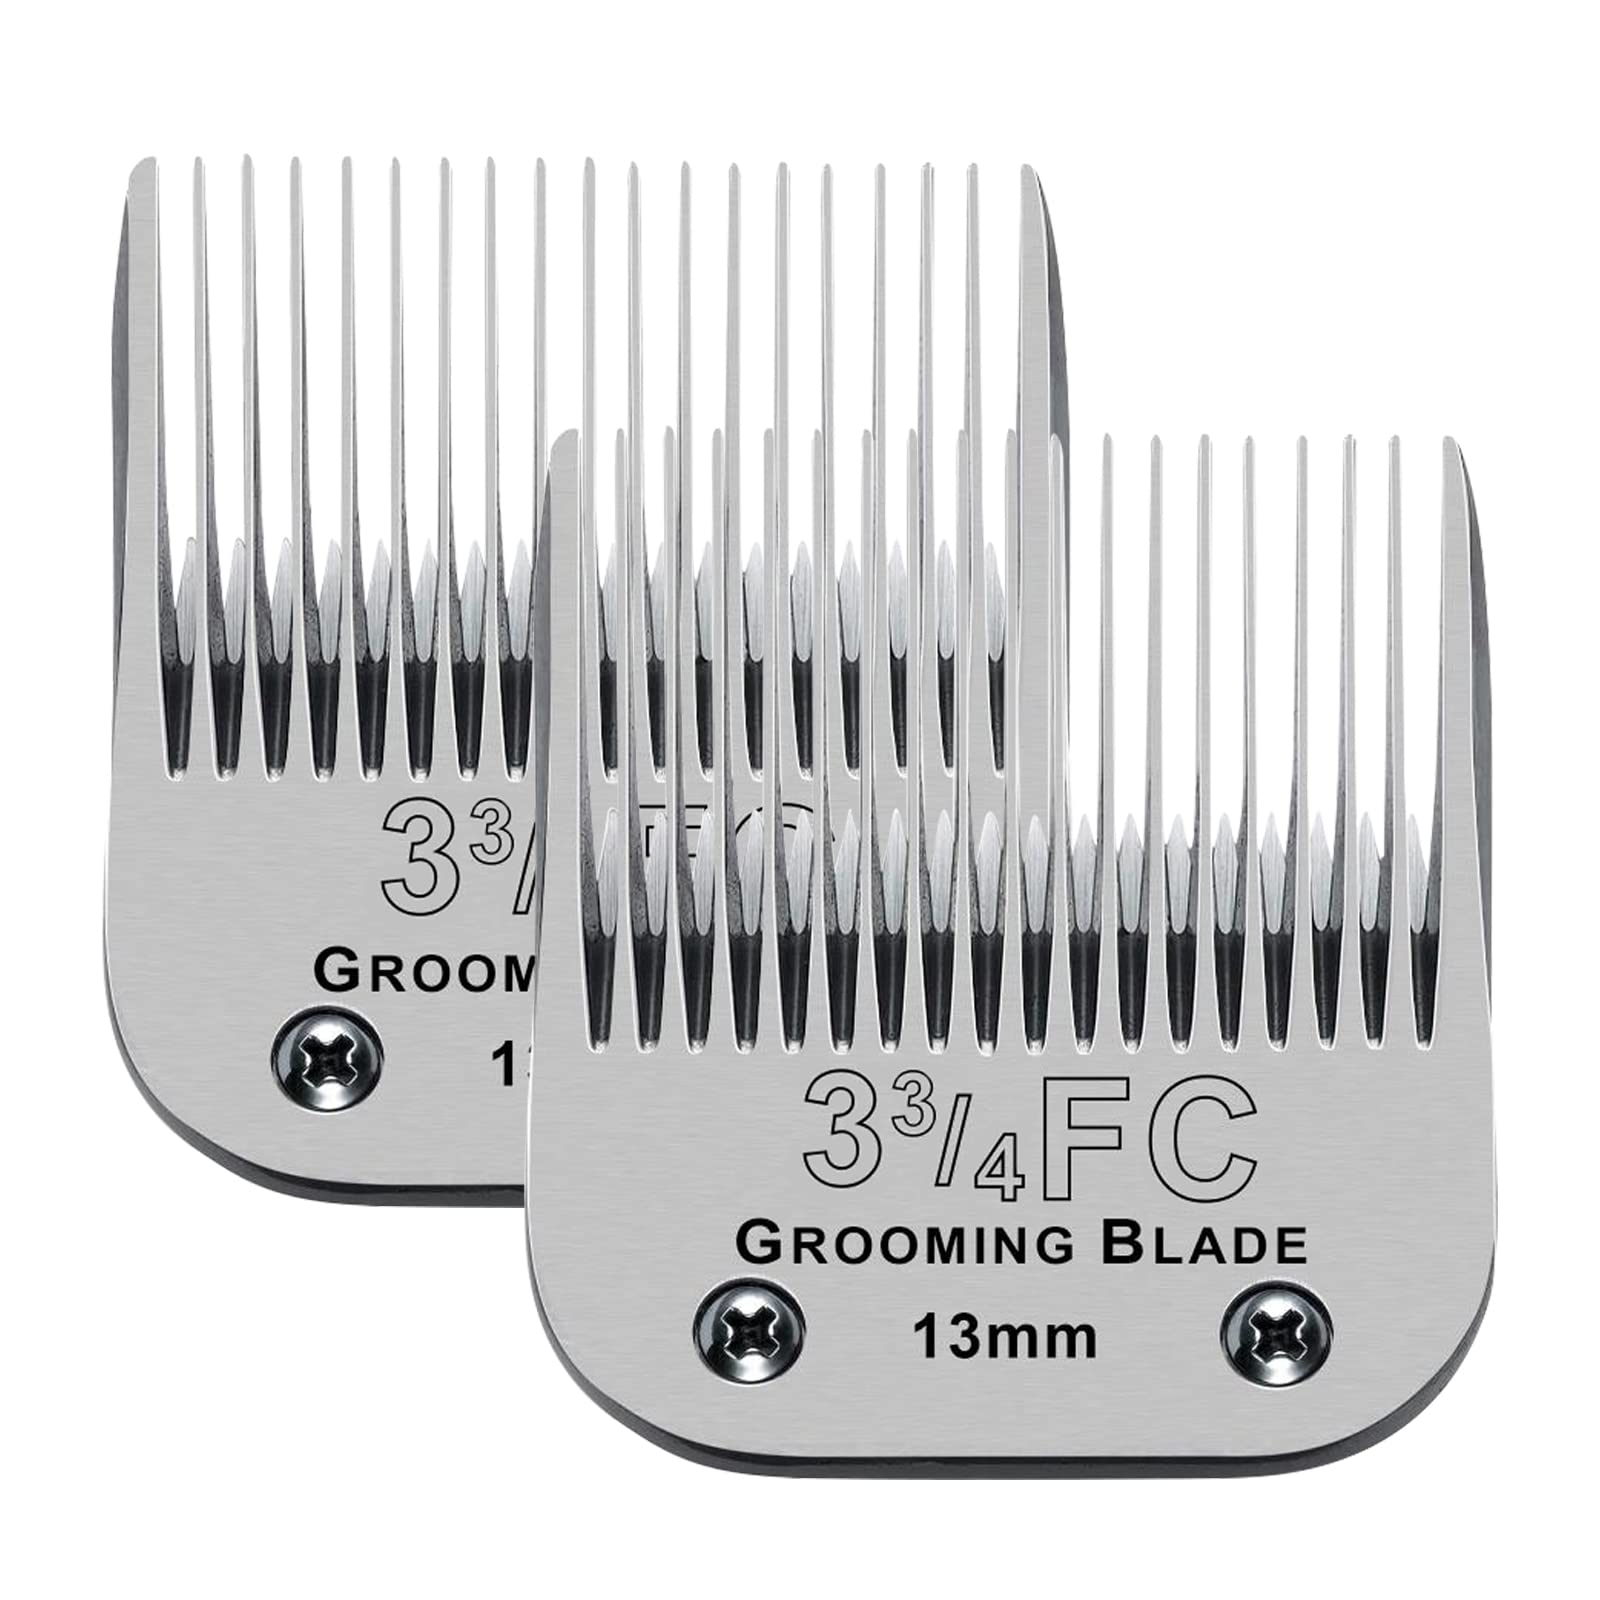 Dog Grooming Clipper Replacement Blades Compatible with Andis/Wahl / O –  AUDOC